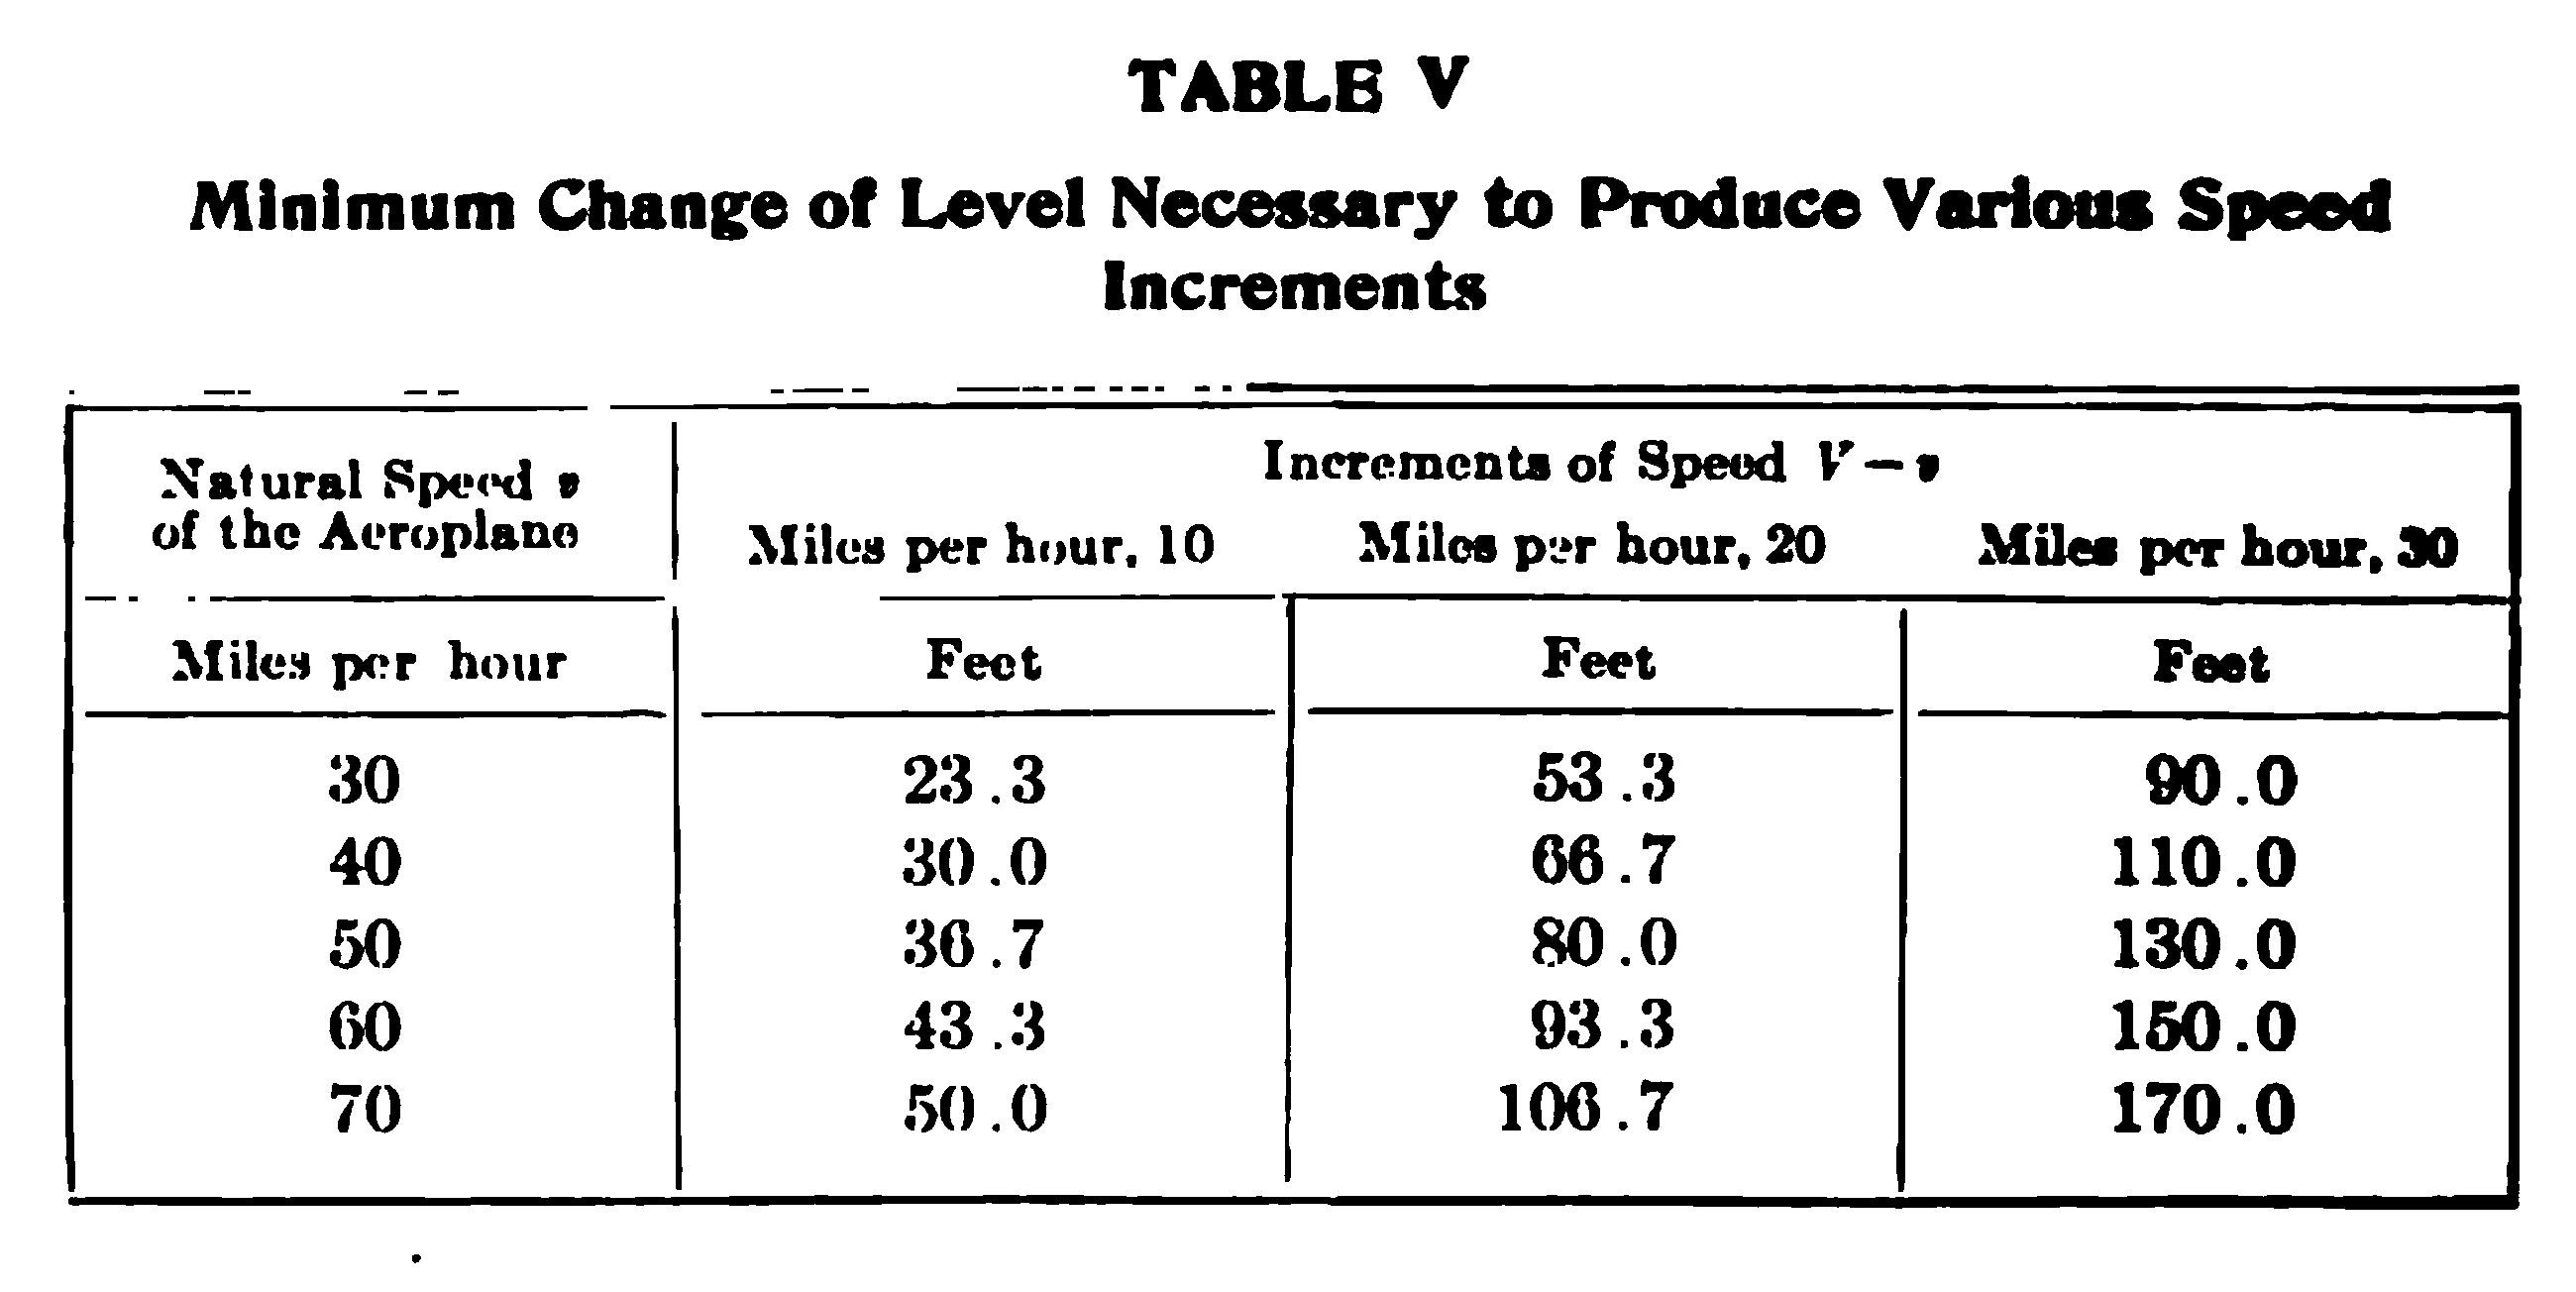 TABLE V Minimum Change of Level Necessary to Produce Various Speed Increments